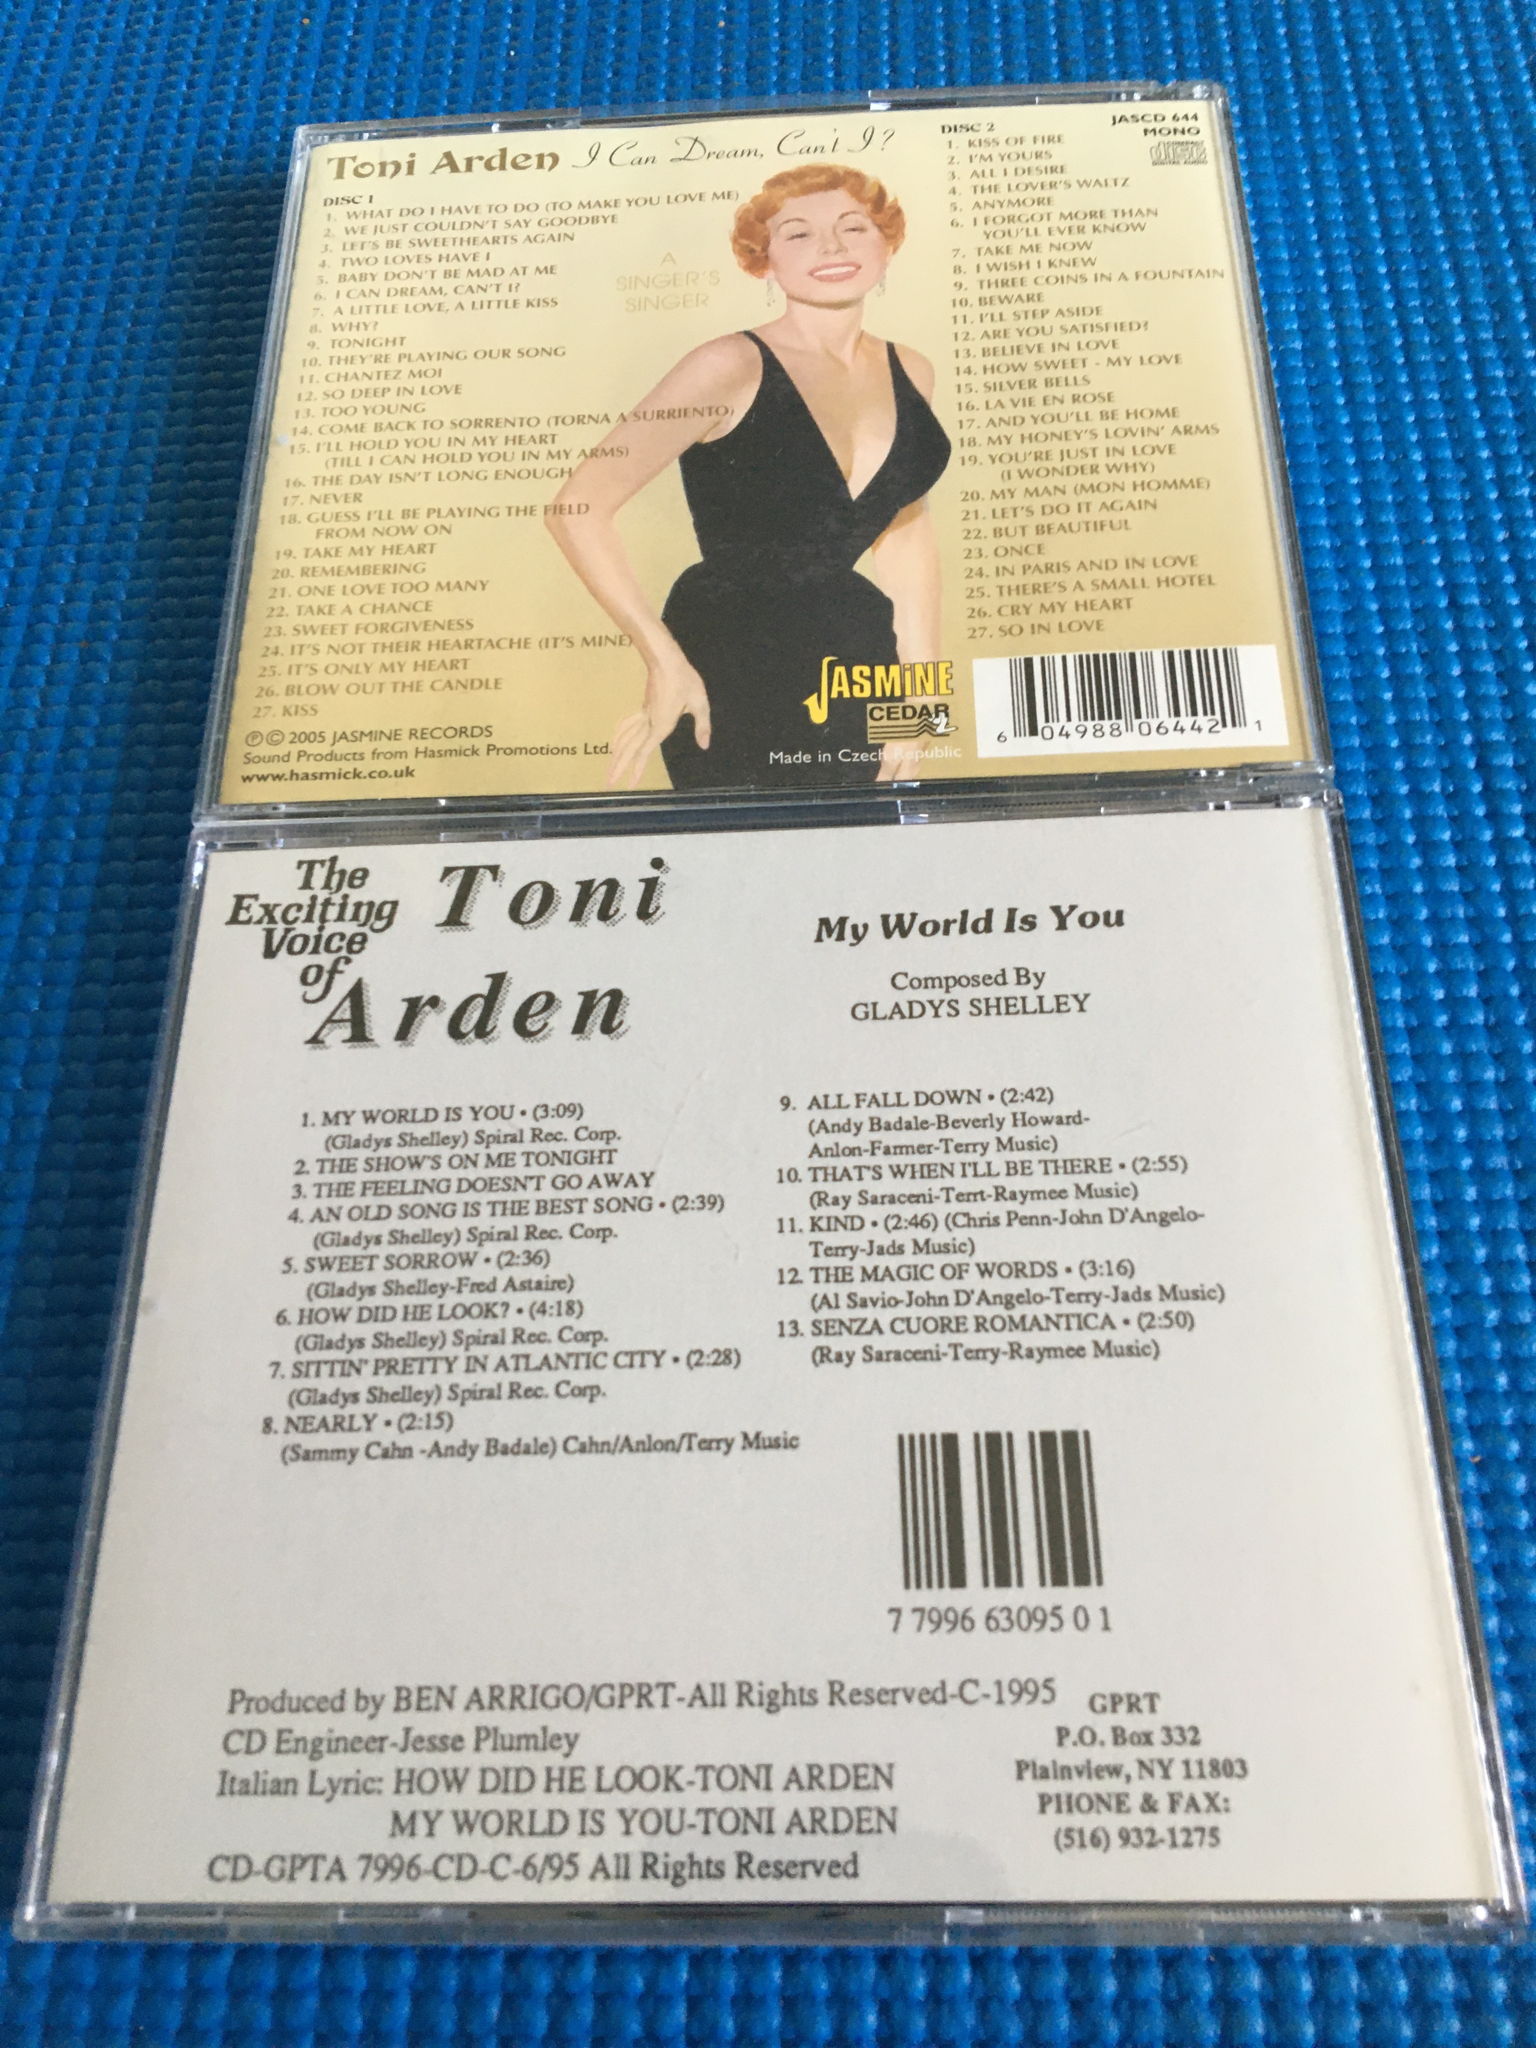 Toni Arden 2 cds The exciting voice and I can Dream Can... 6